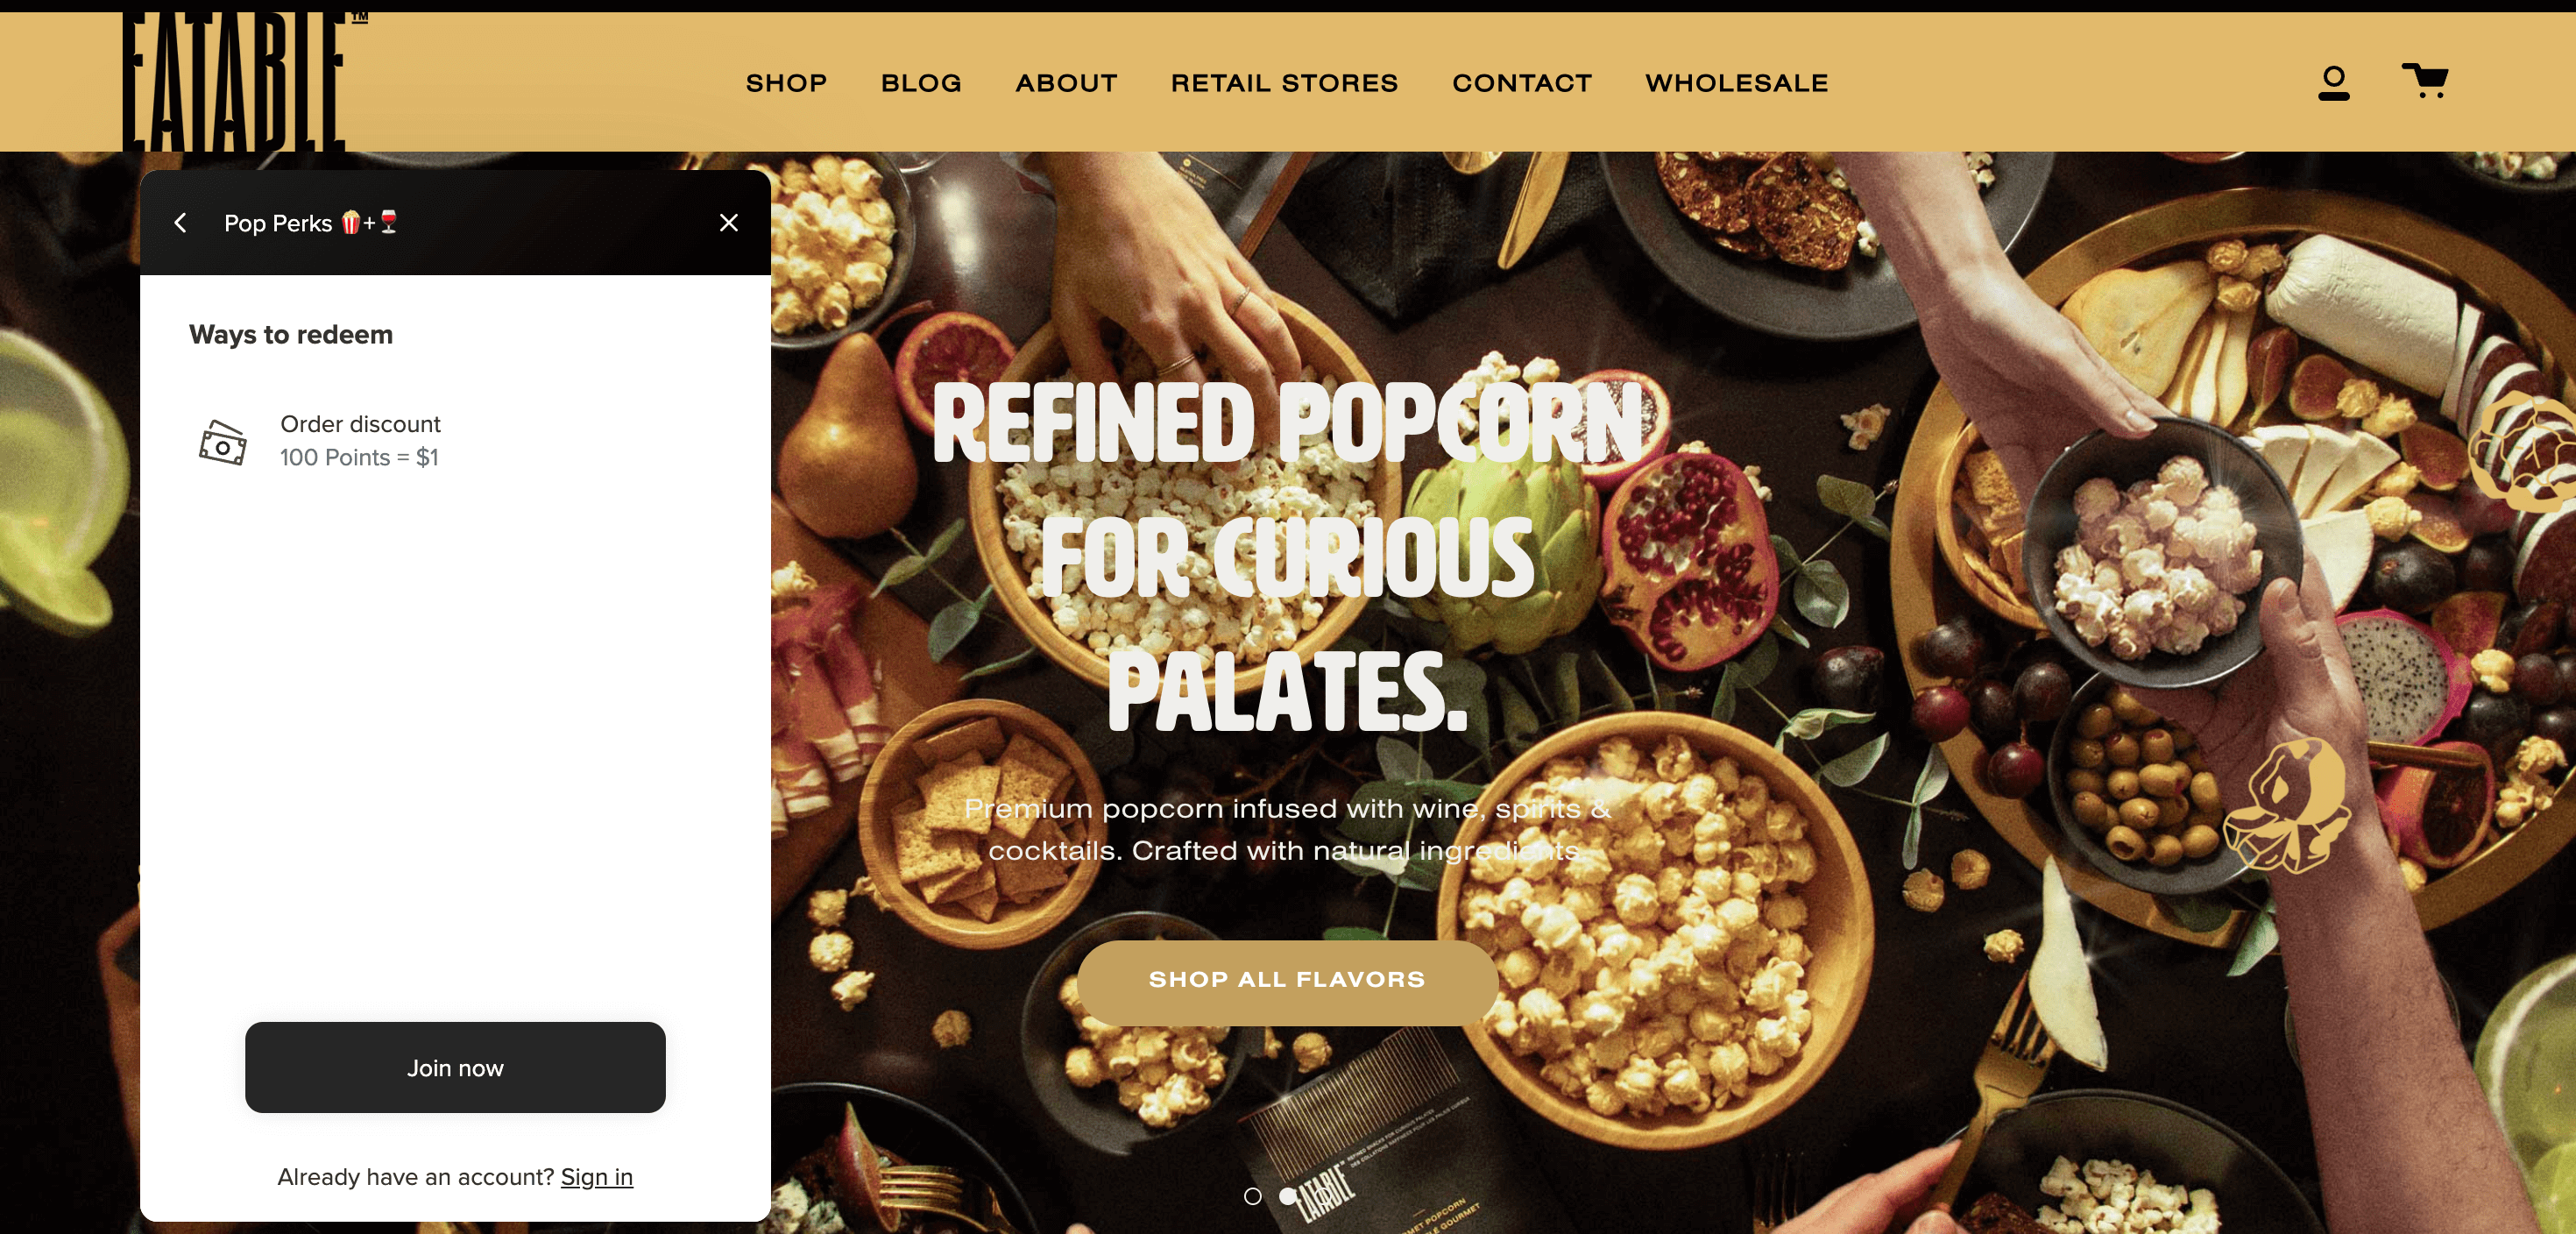 A screenshot of EATABLE Popcorn’s homepage with its rewards program panel on the left-hand side illustrating that 100 points = $1 off.